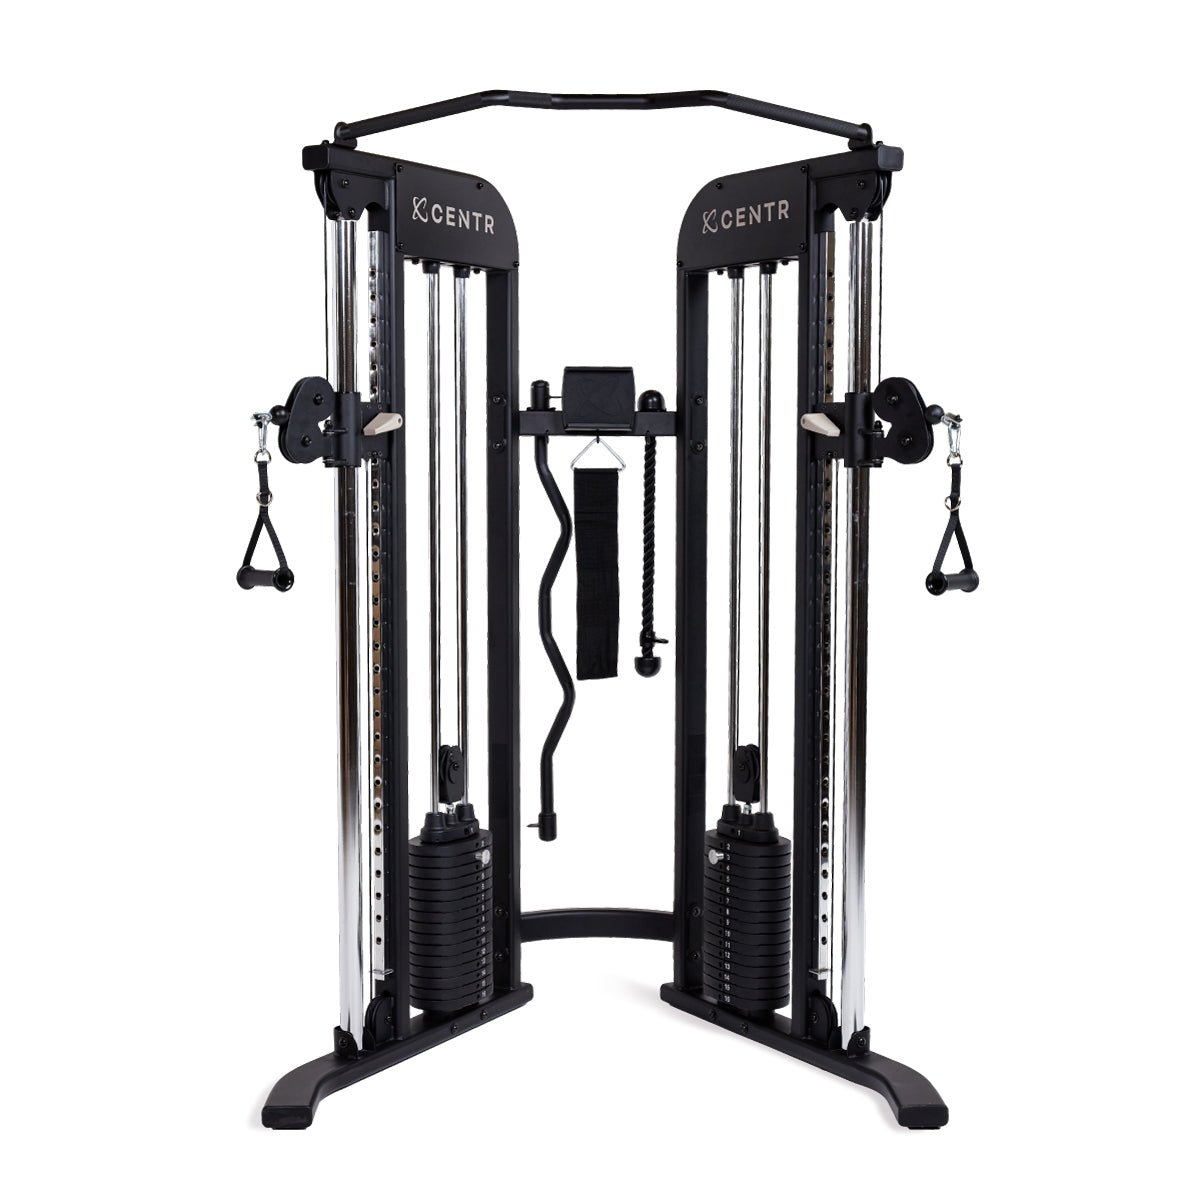 Centr 2 Home Gym Functional Trainer with Pull Up Bar - Centr